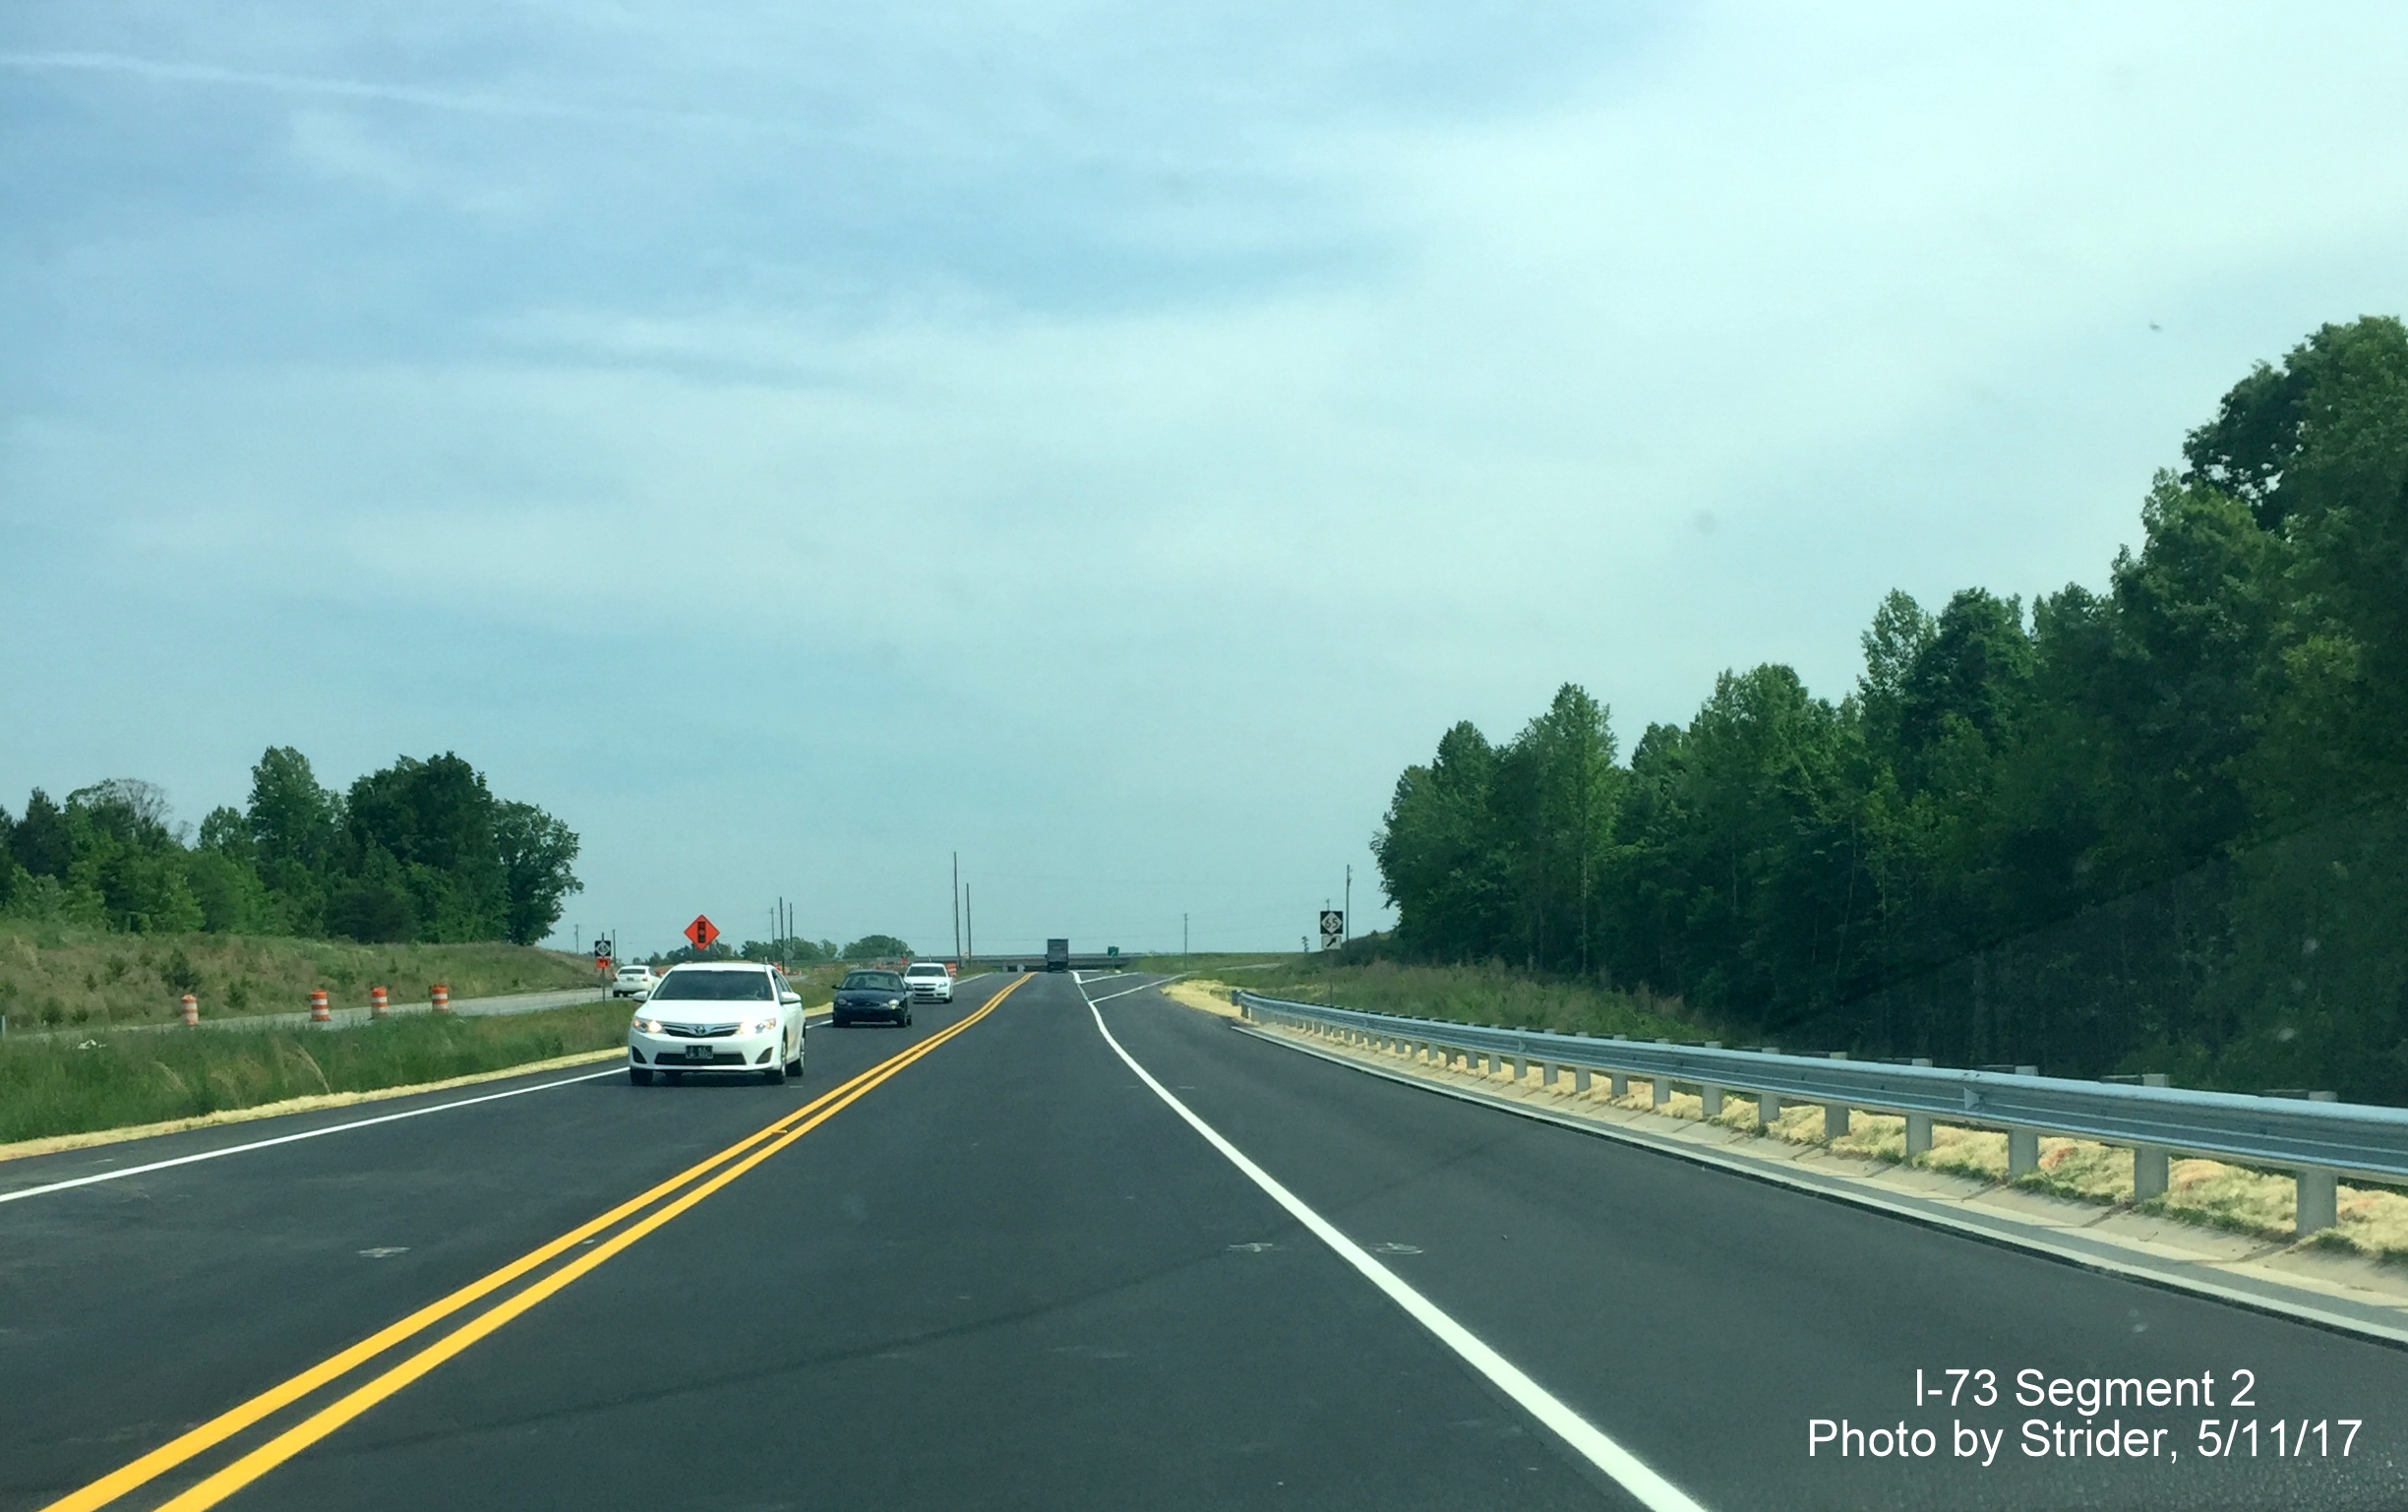 Image taken from US 220 South approaching newly opened off-ramp to NC 65 from Future I-73 South, by Strider